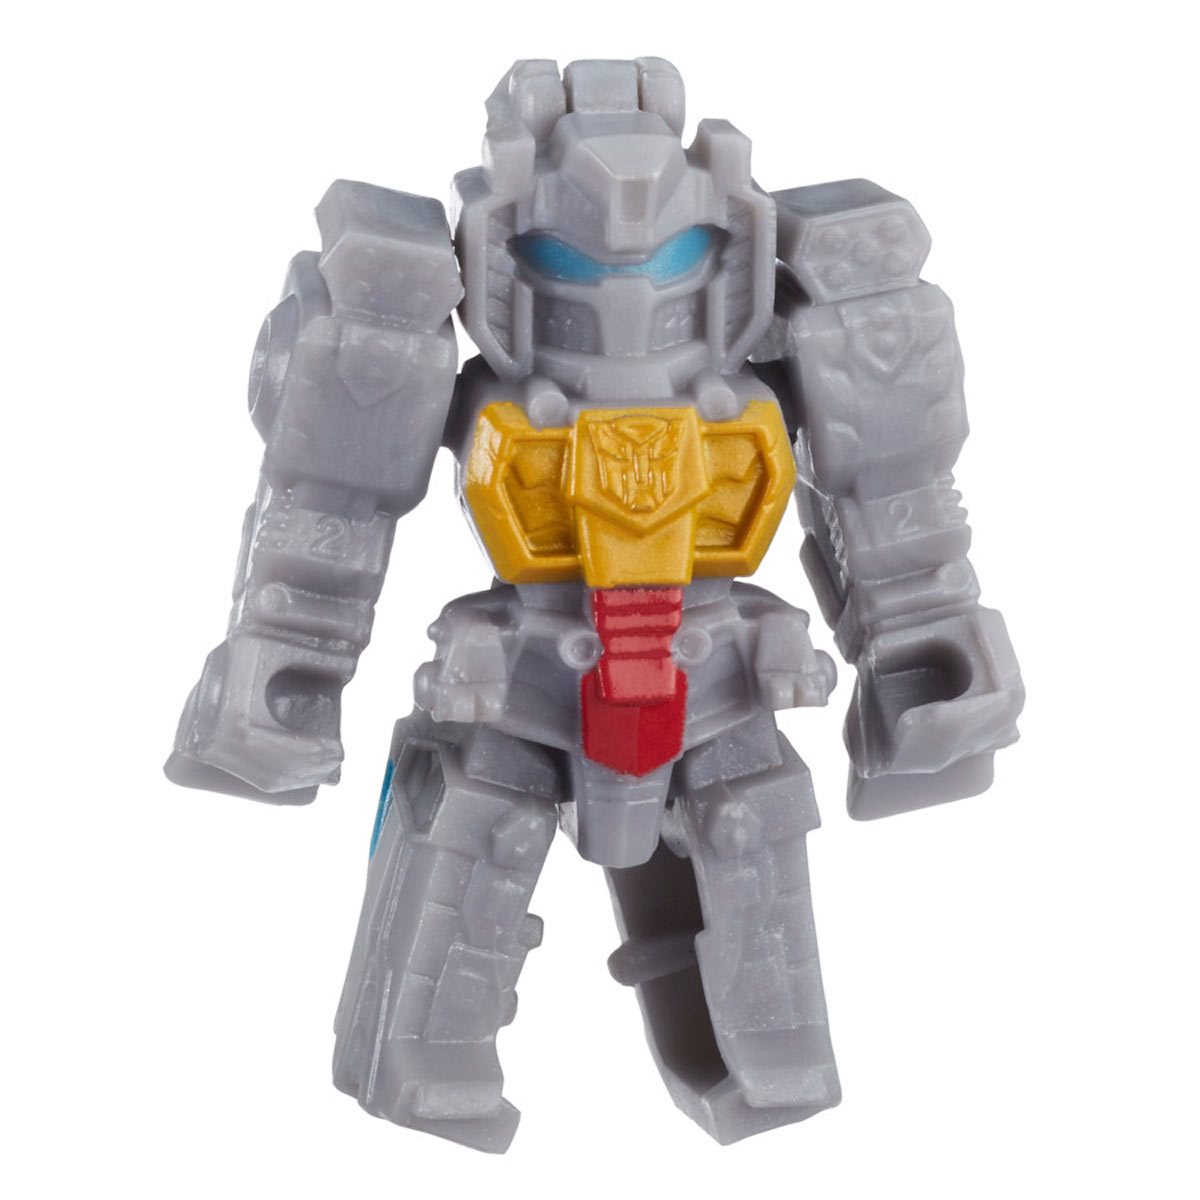 Transformers Cyberverse Tiny Turbo Changers Series 5 Autobot Whirl